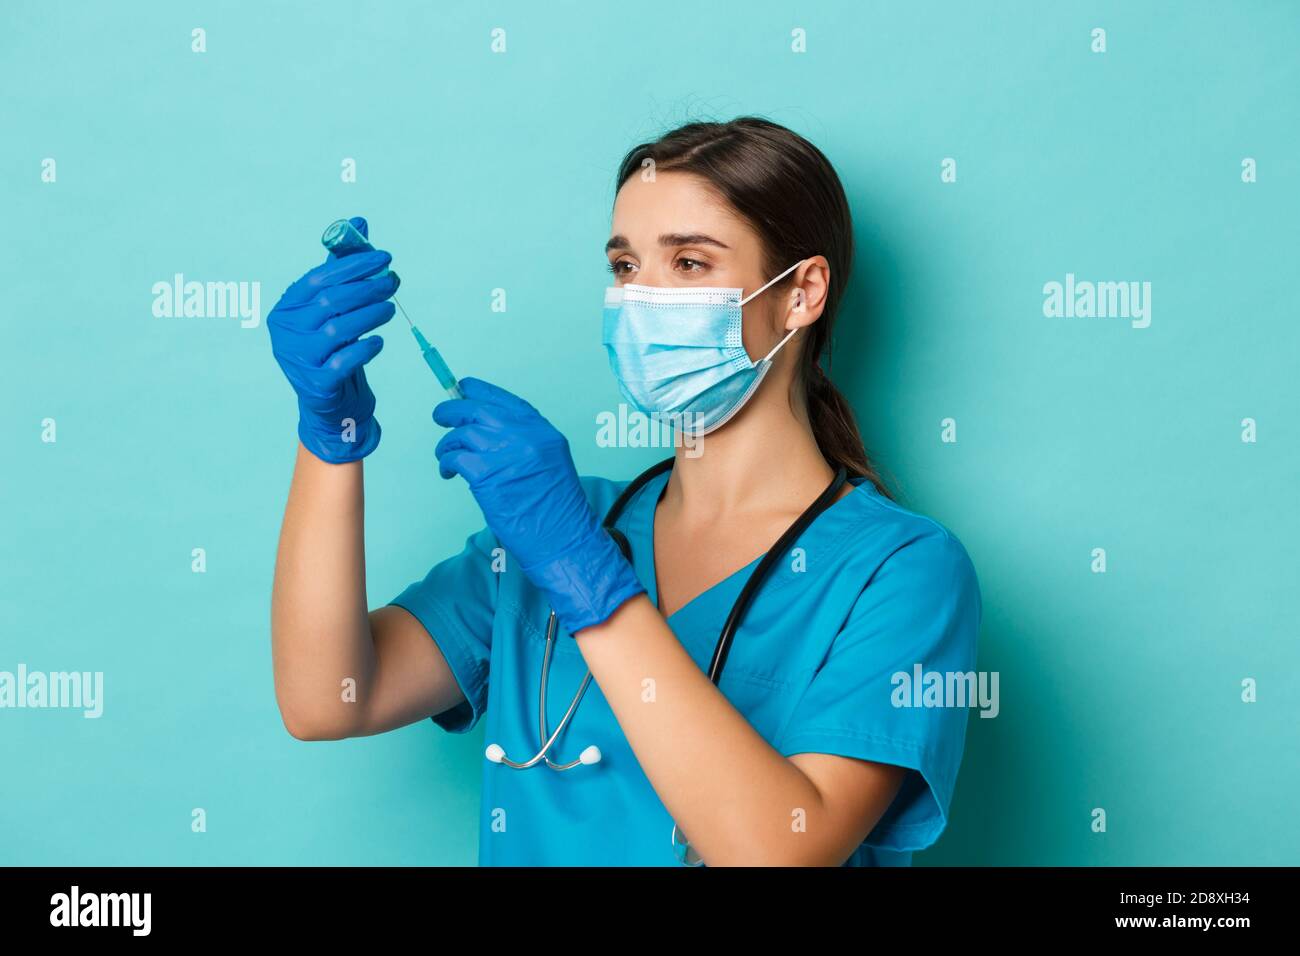 Concept of covid-19 and quarantine concept. Image of female doctor in medical mask, gloves and scrubs, filling syringe with coronavirus vaccine Stock Photo